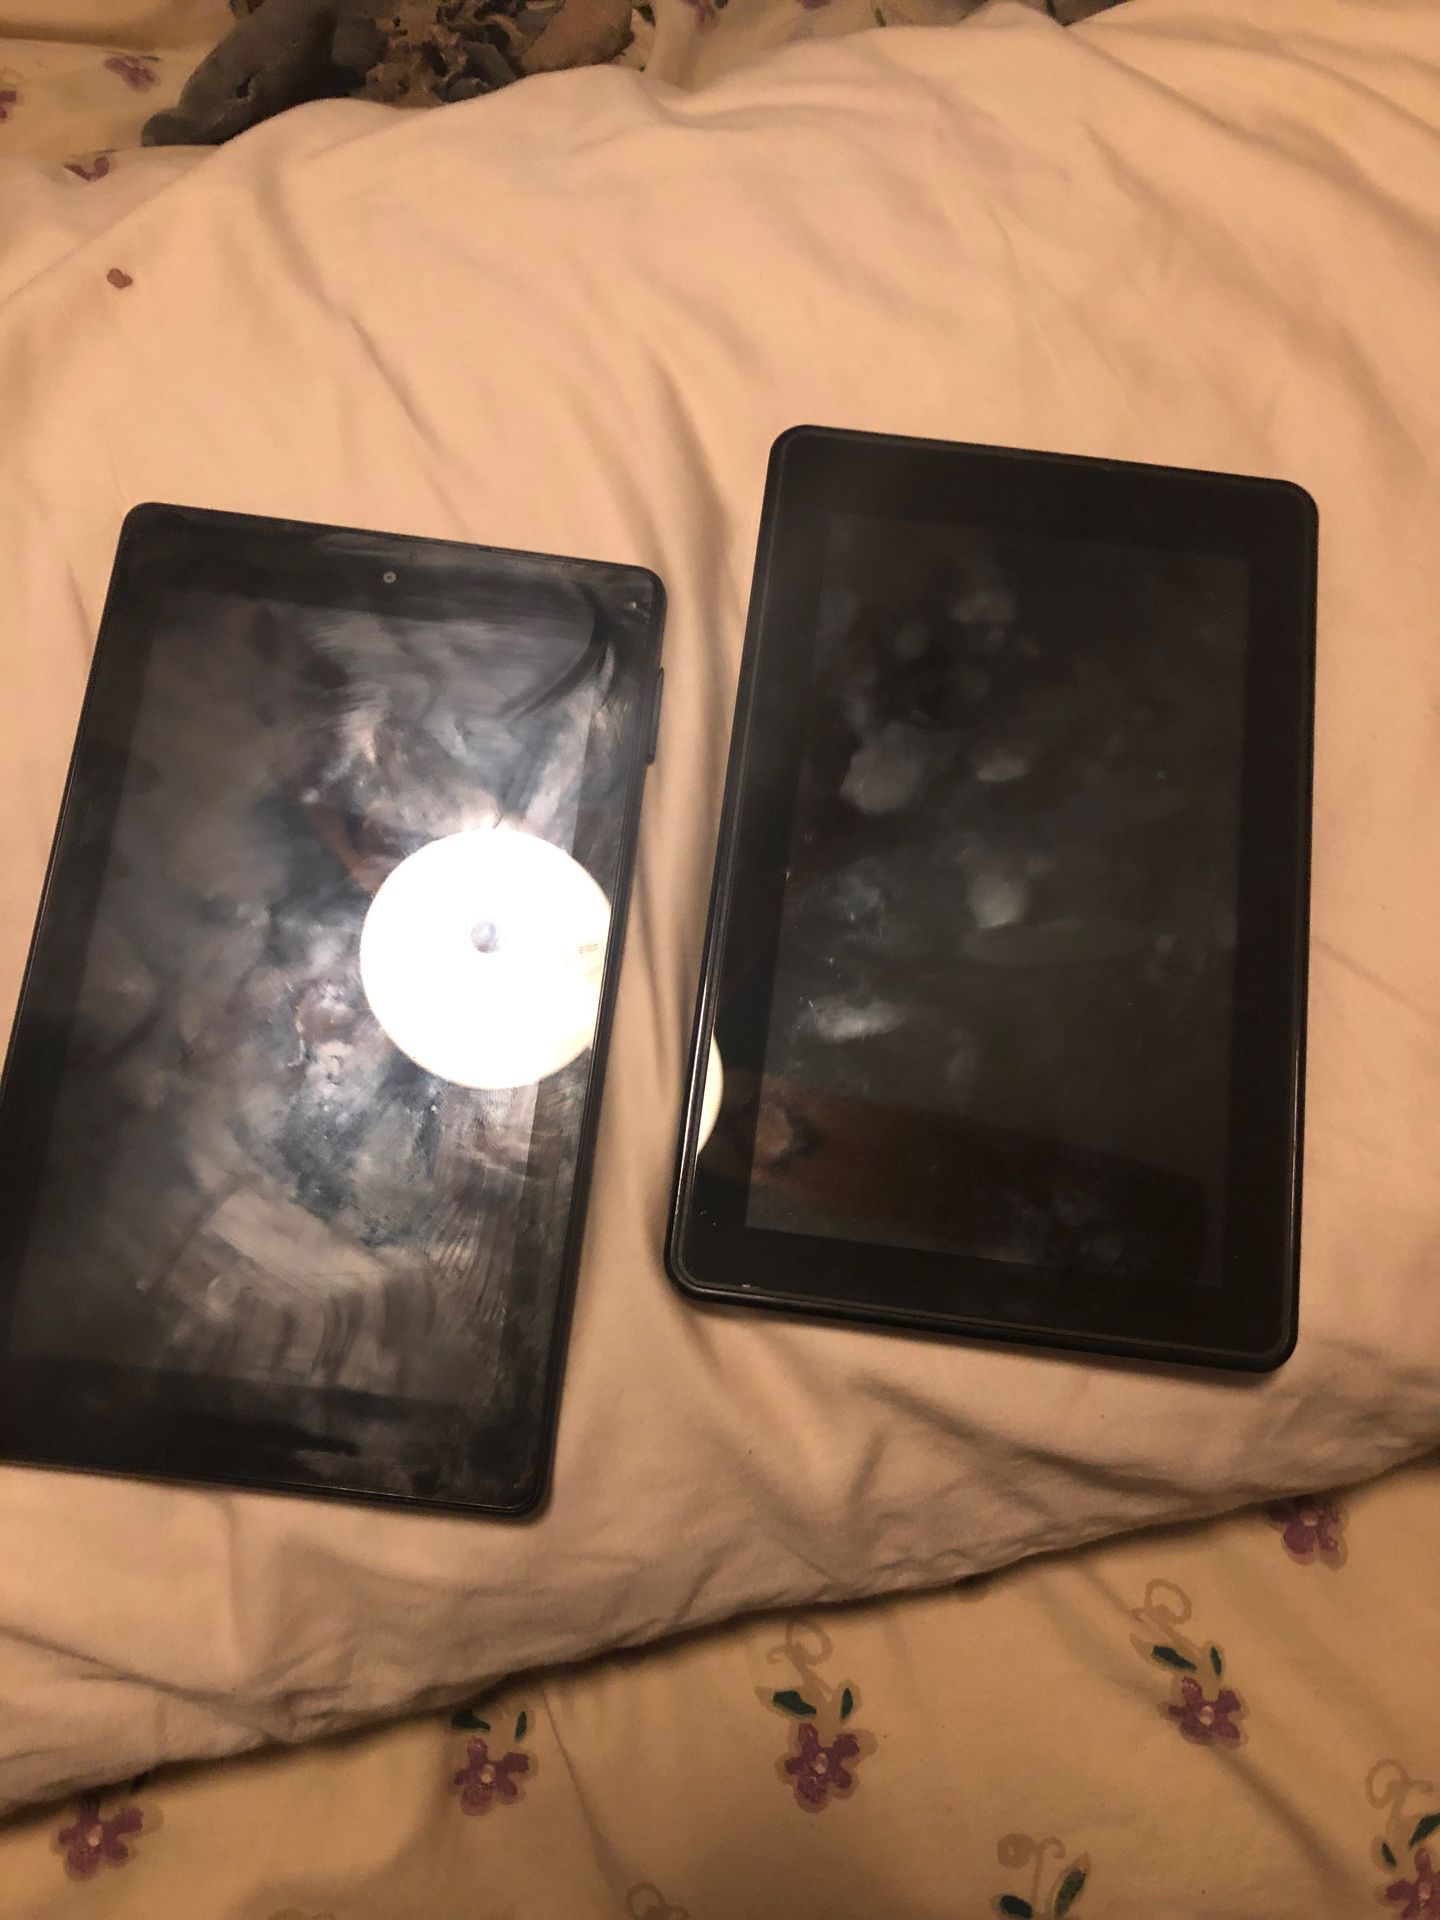 Two tablets ones a kindle fire others just an Amazon tablet